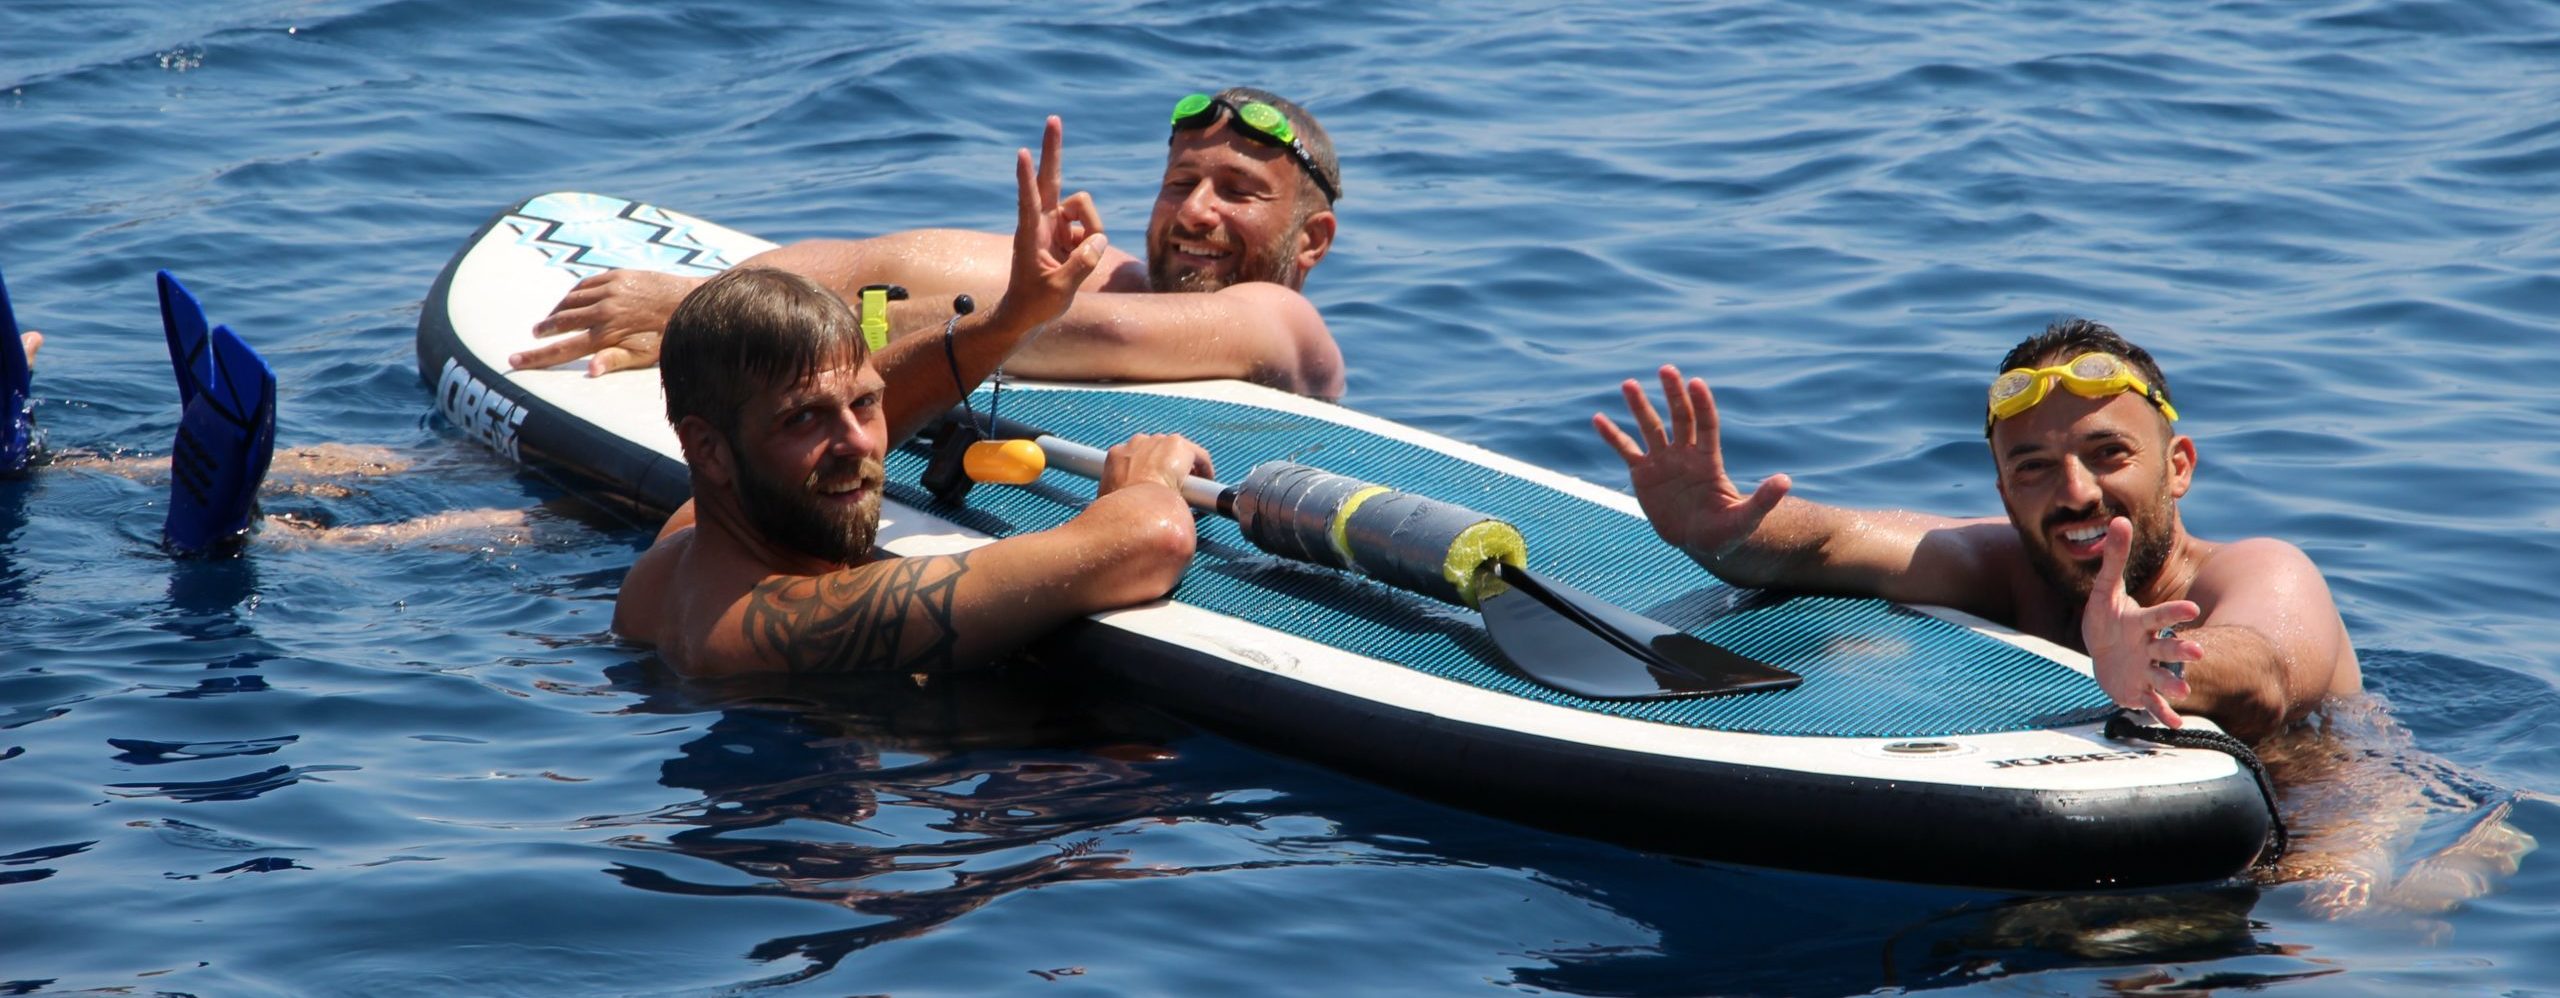 Saltyboys gay socialising in the sea on SUP peddle board